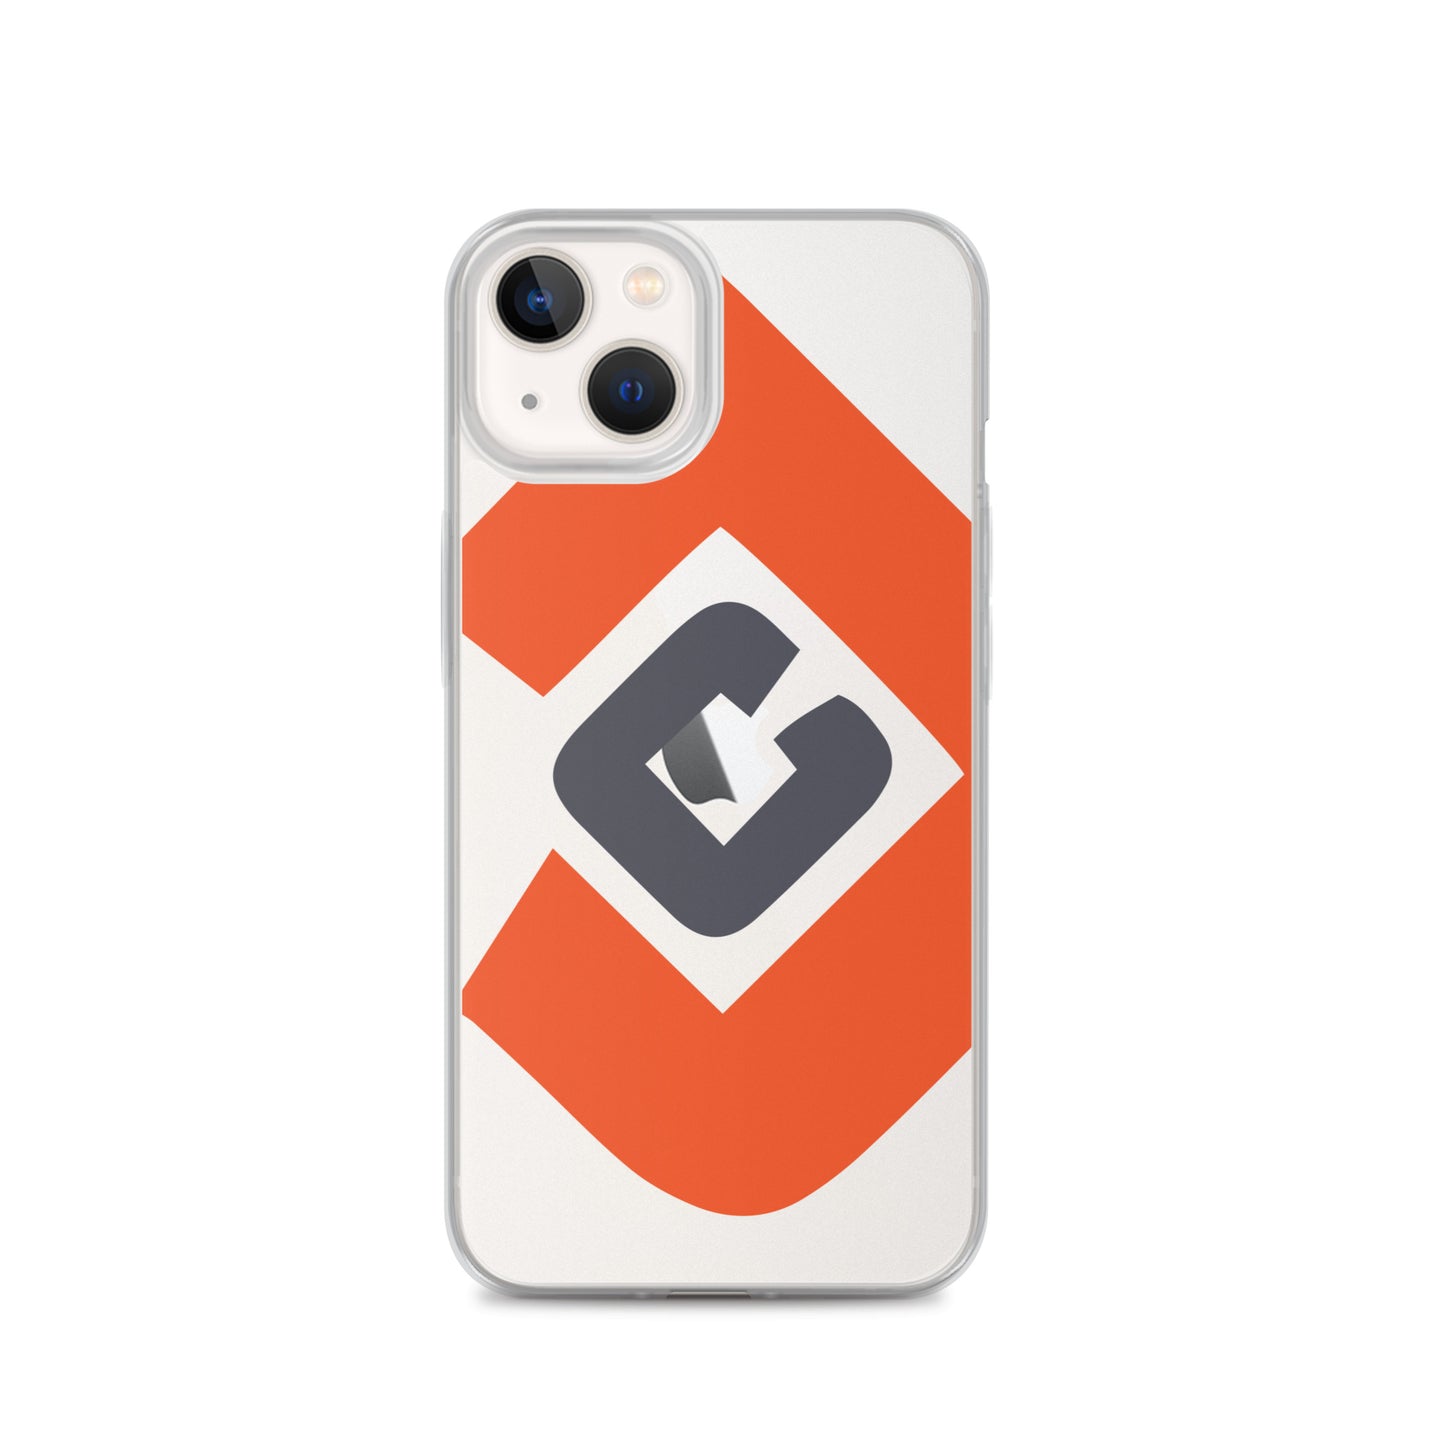 iPhone Case - Jacoby Creative